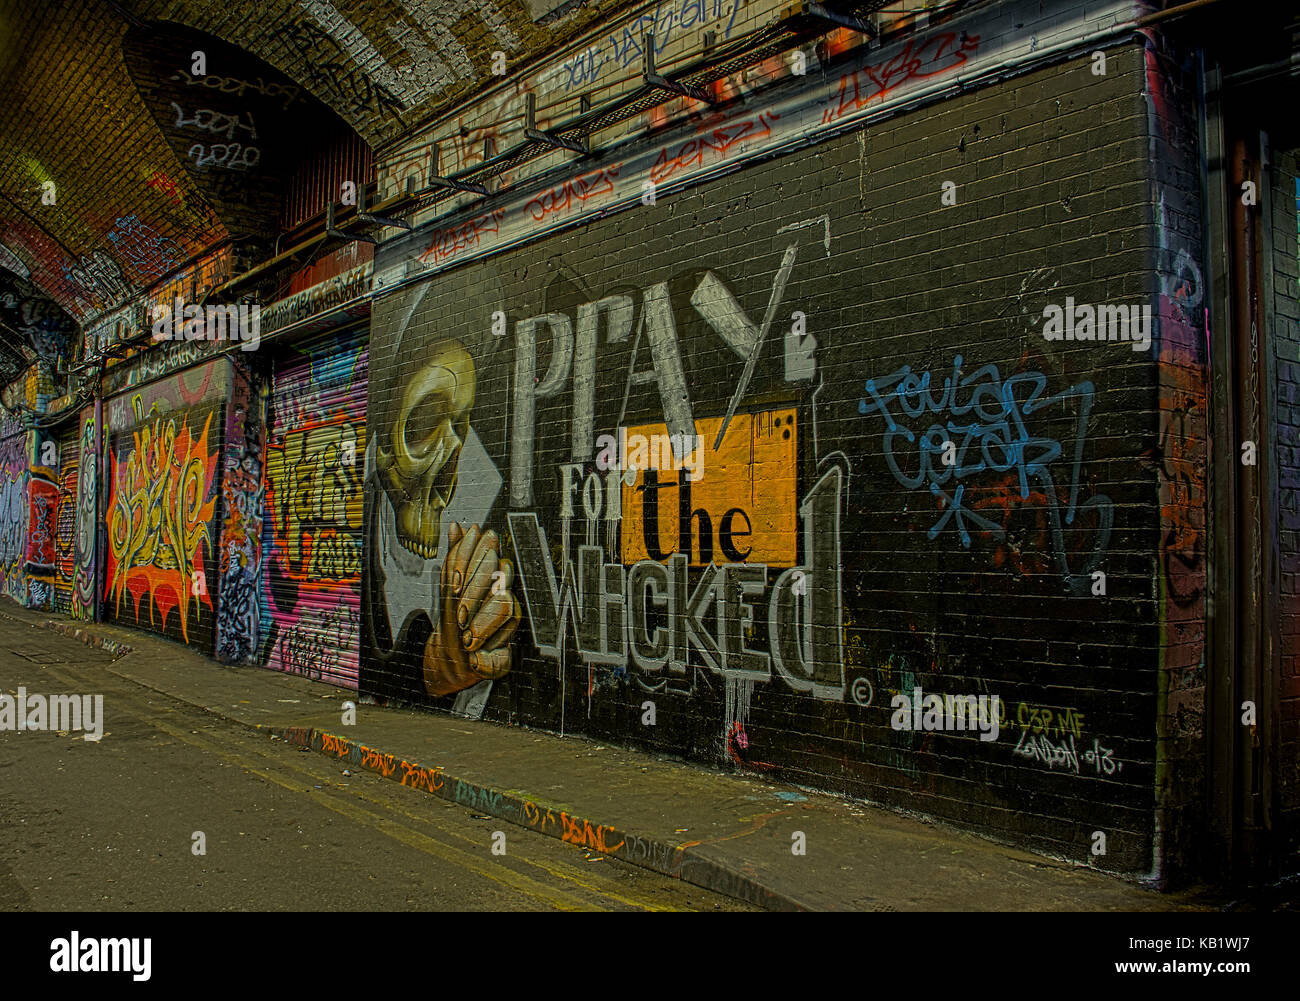 London Graffiti along Leake Street Tunnel, Also known as Bansy Tunnel in Lambeth, London, England UK Stock Photo